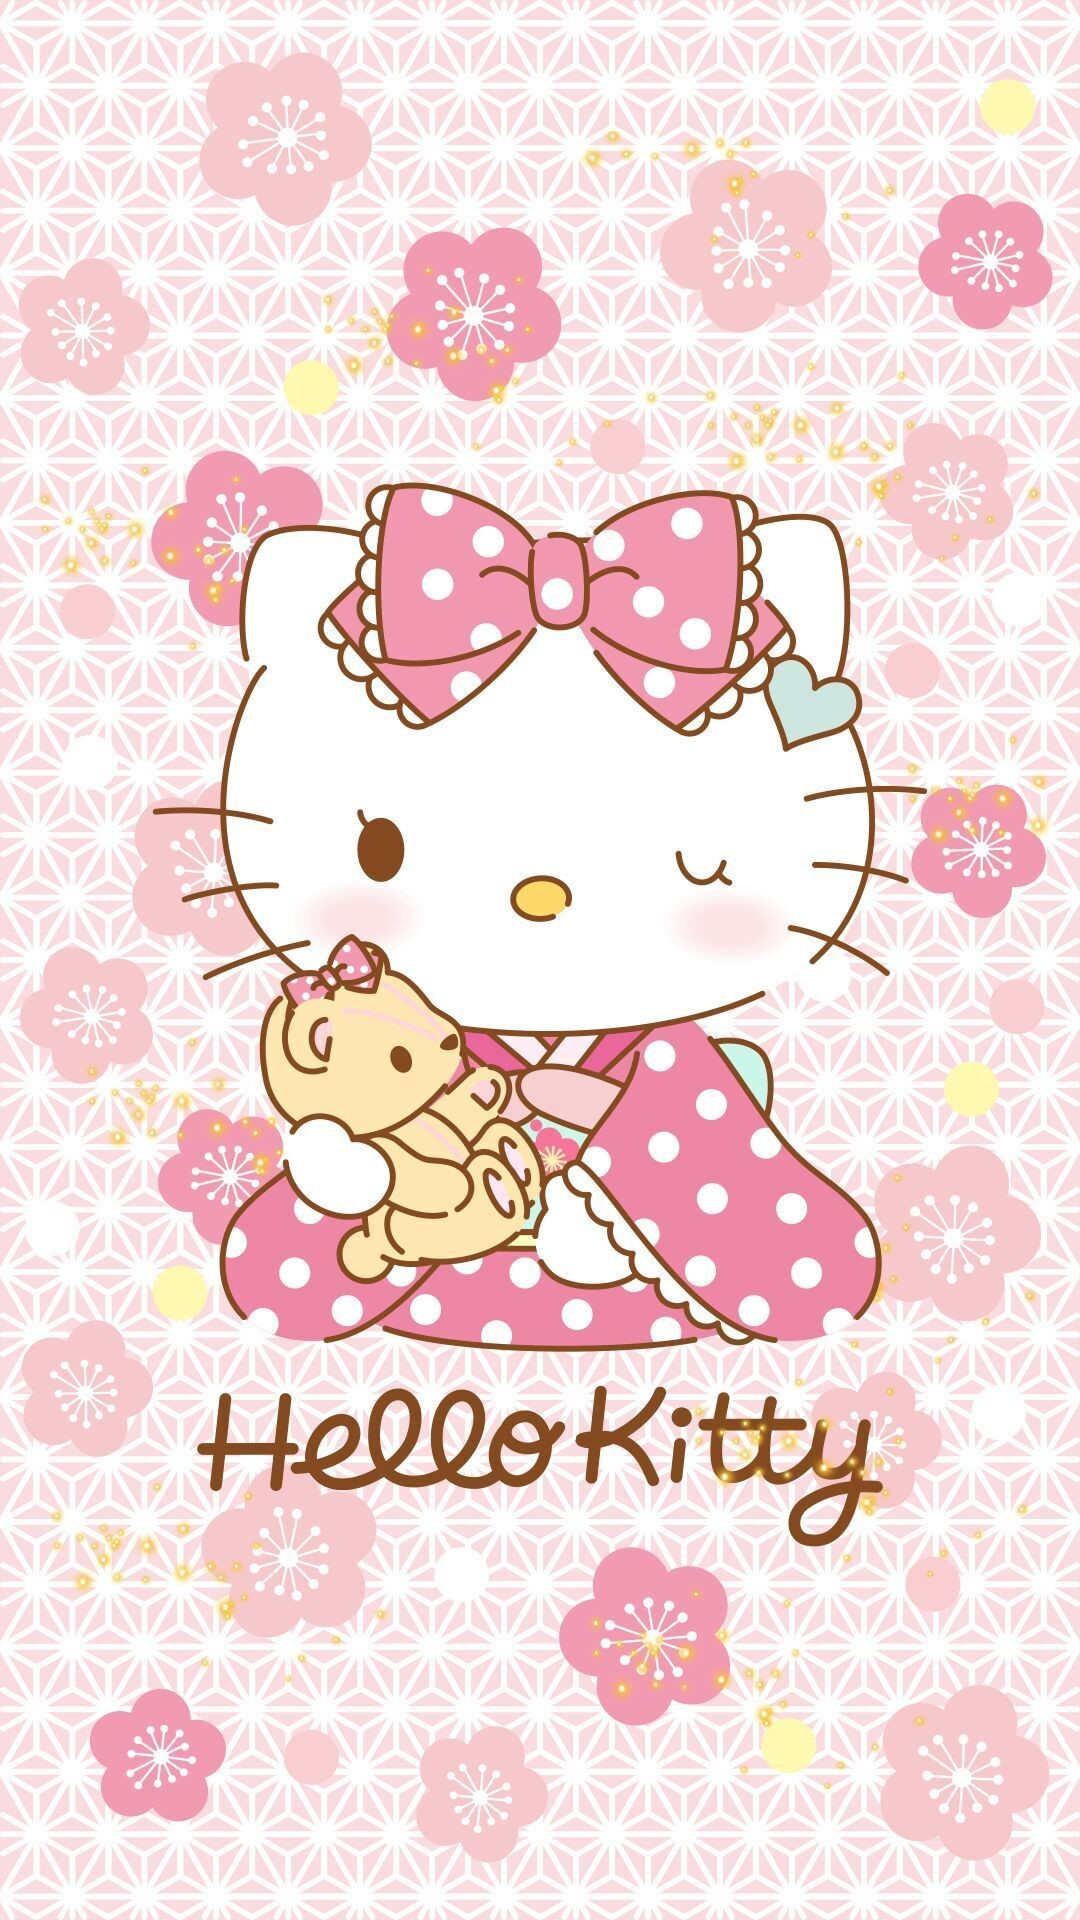 Free Download 65 Hello Kitty Wallpapers On Wallpaperplay 1080x19 For Your Desktop Mobile Tablet Explore 52 Wallpapers Of Kitty Cute Hello Kitty Wallpaper Hello Kitty Wallpapers Hello Kitty Wallpaper For Computer